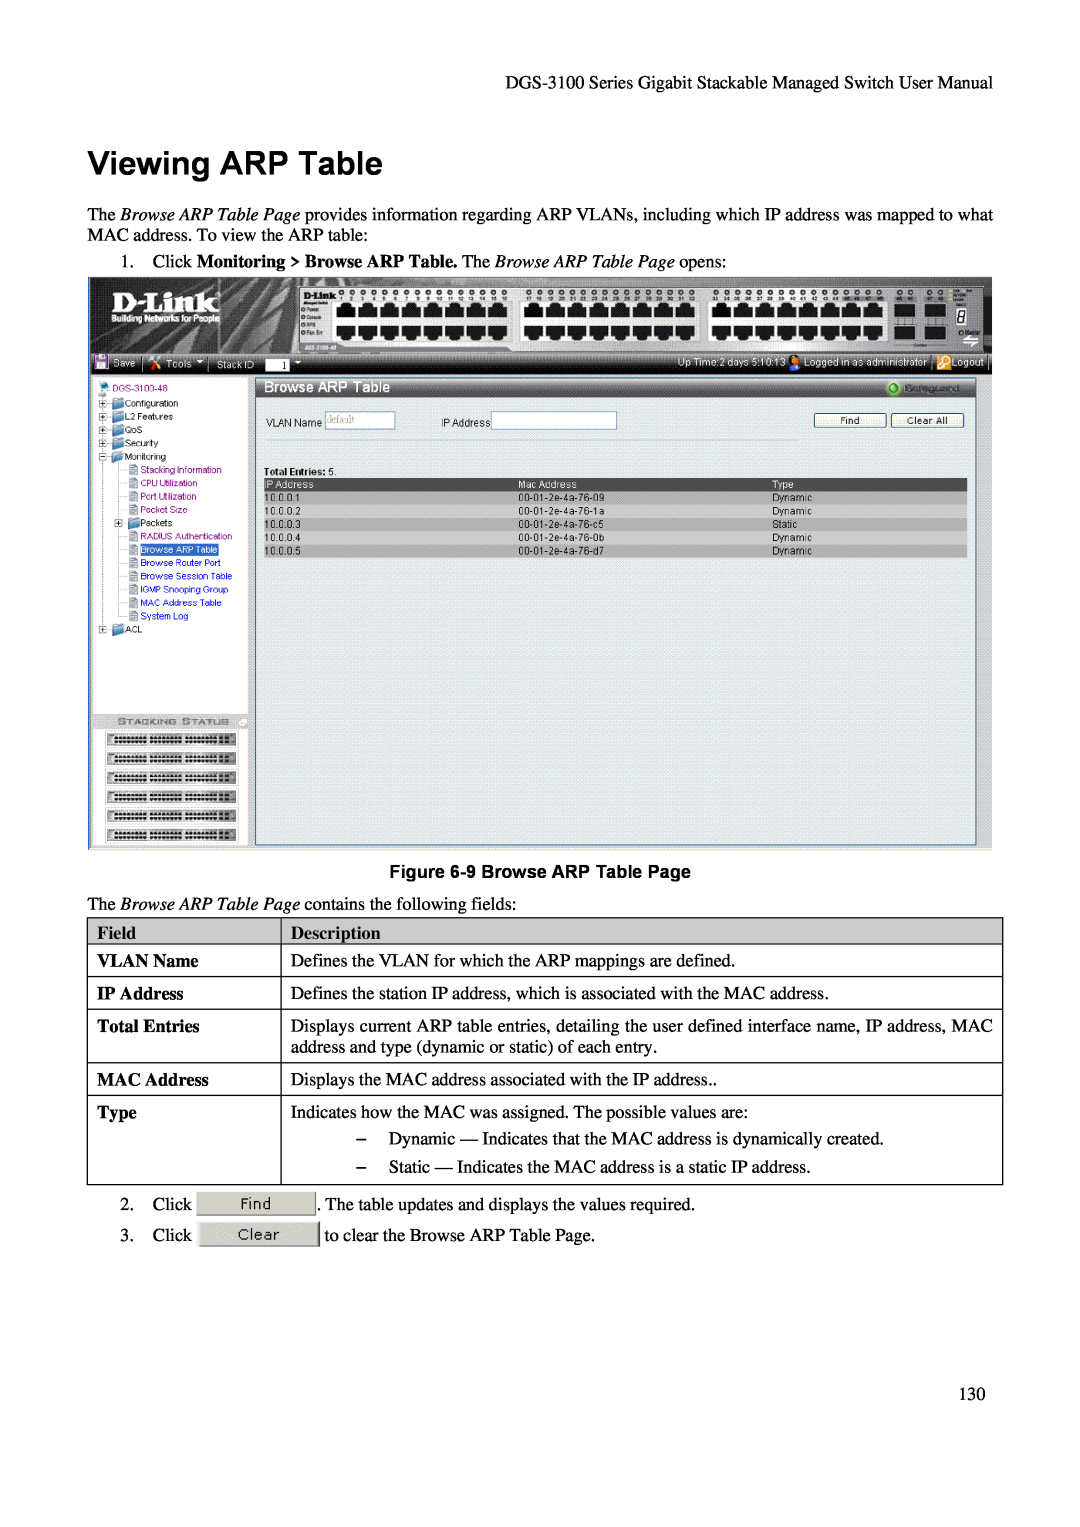 D-Link DGS-3100 Viewing ARP Table, 9 Browse ARP Table Page, Field VLAN Name IP Address Total Entries MAC Address Type 